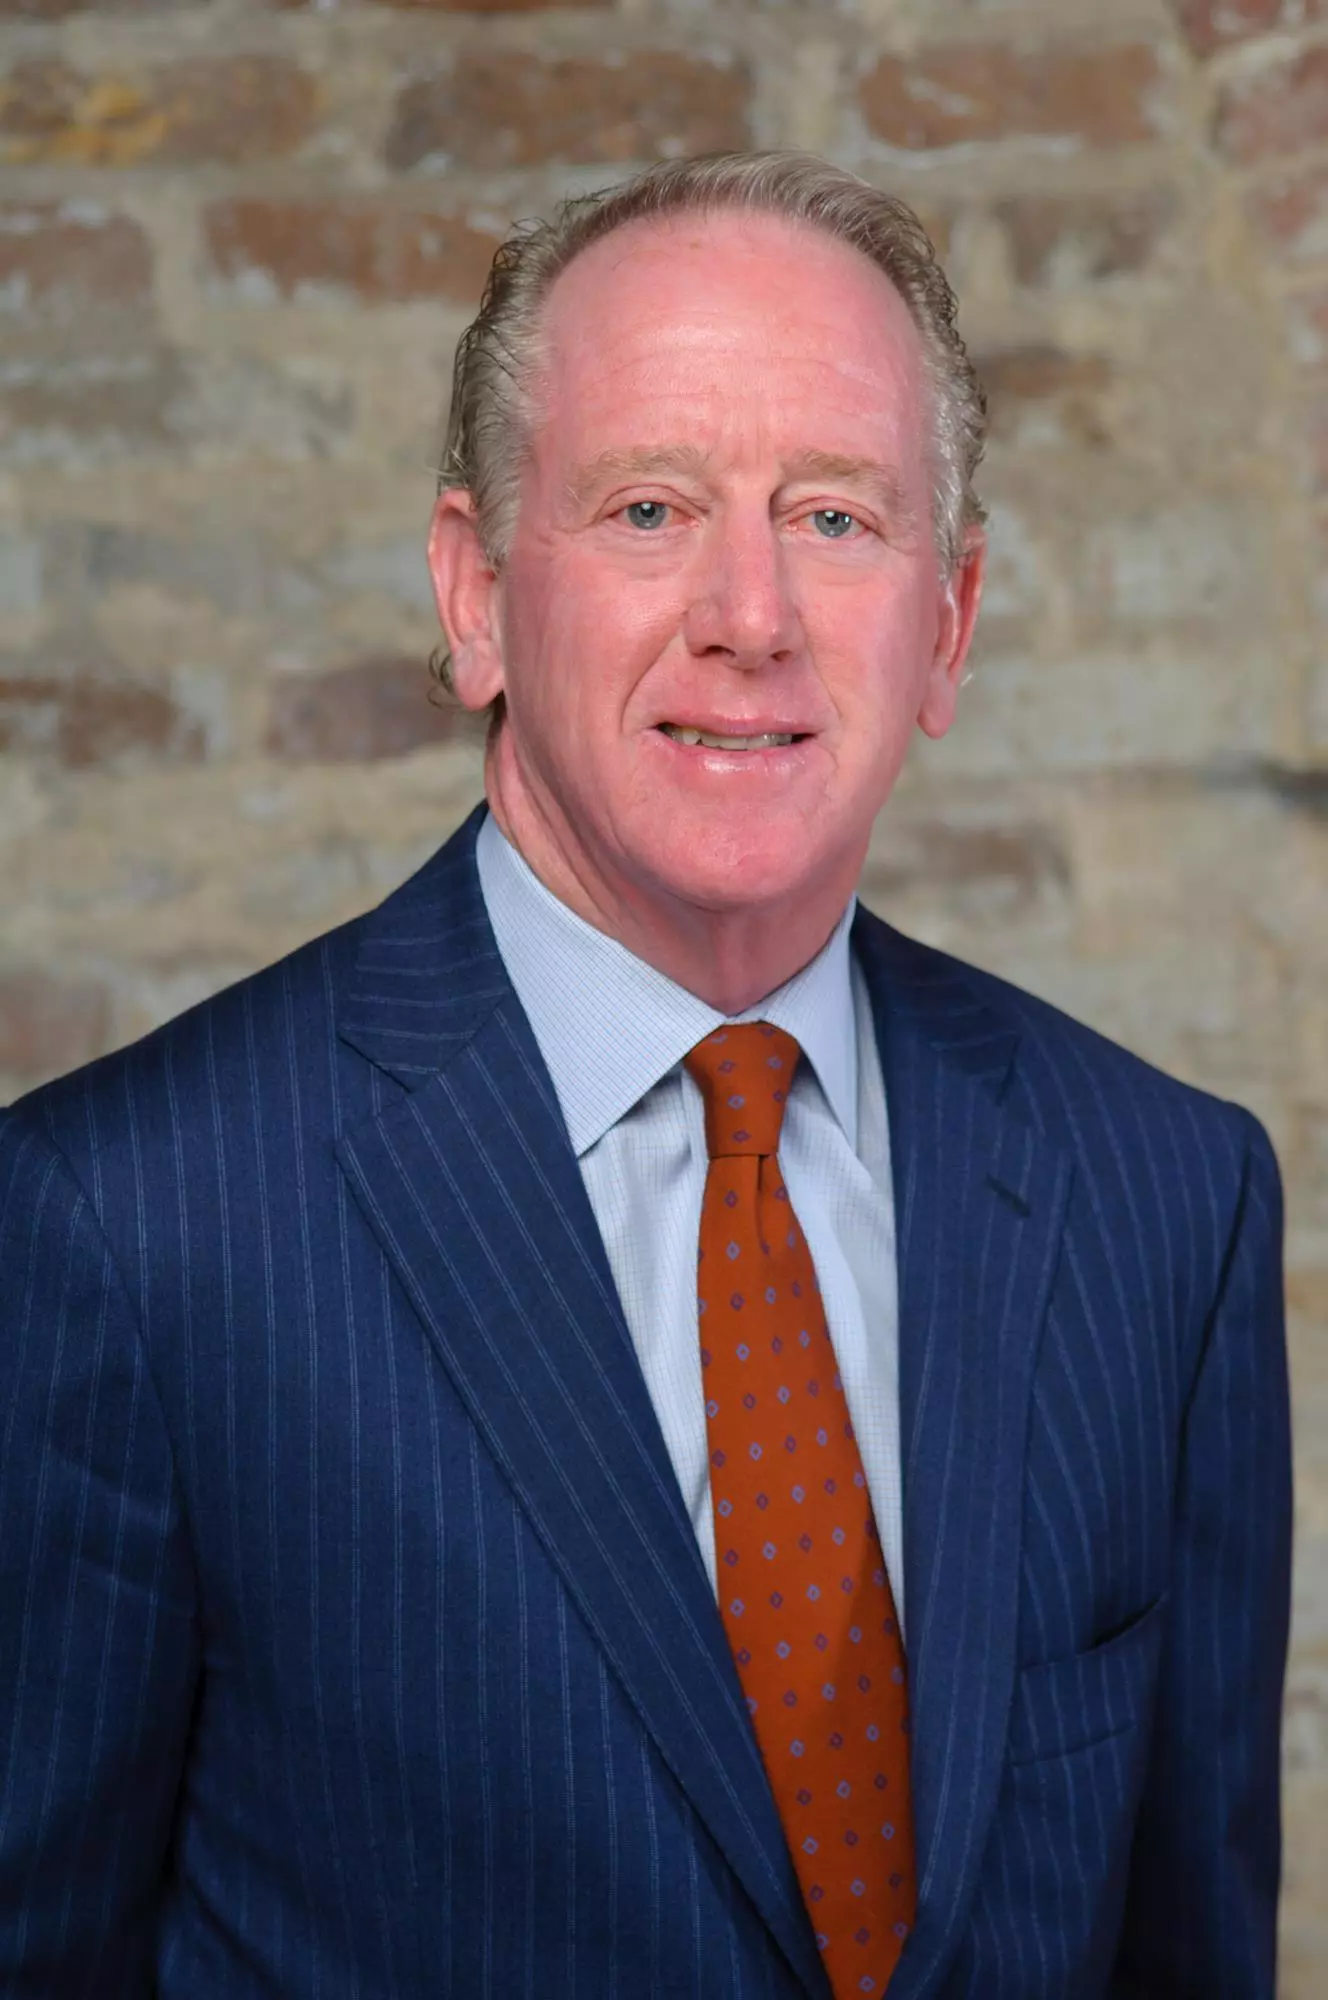 NFF Chairman Archie Manning